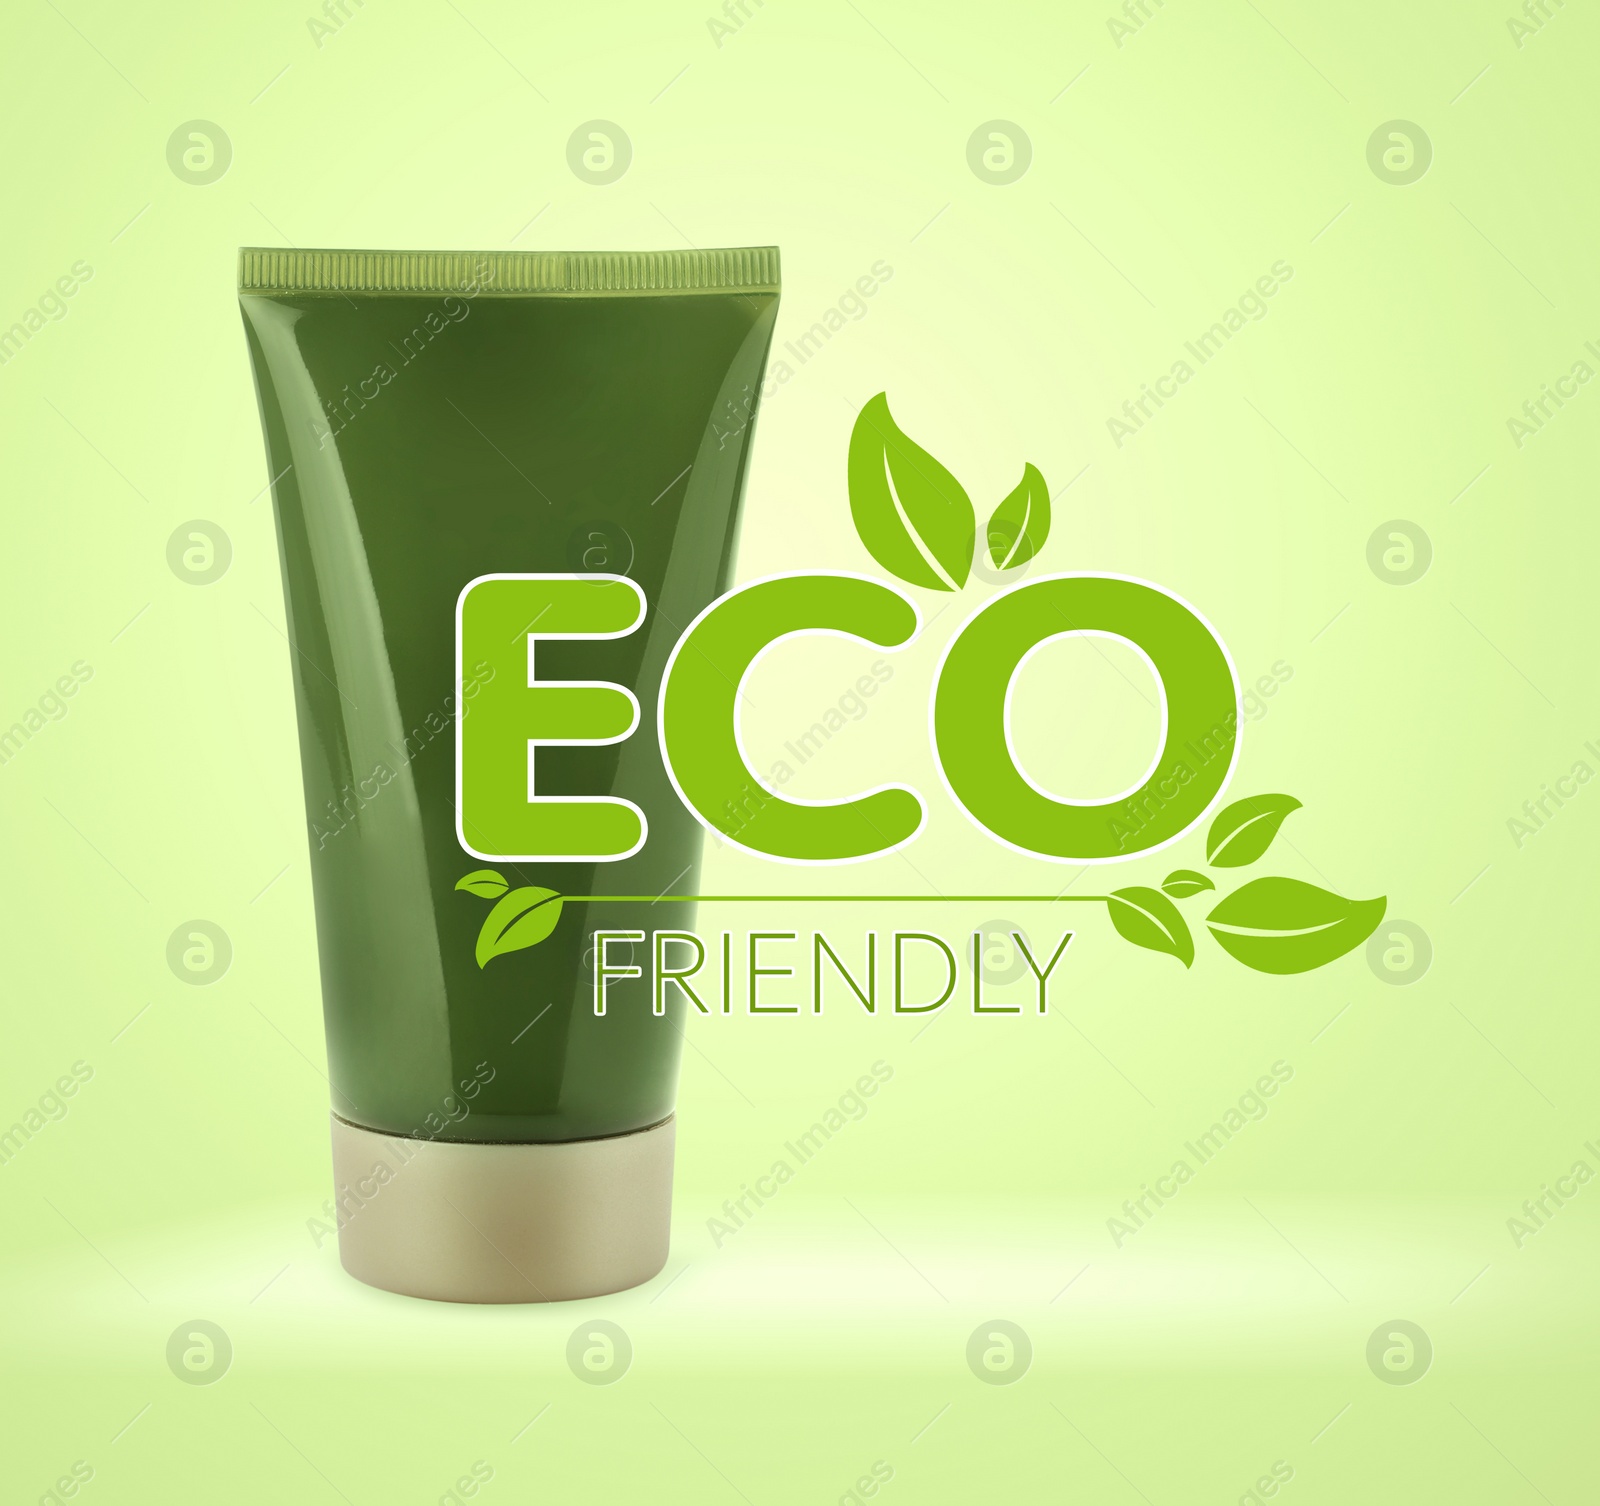 Image of Organic eco friendly cosmetic product on green background